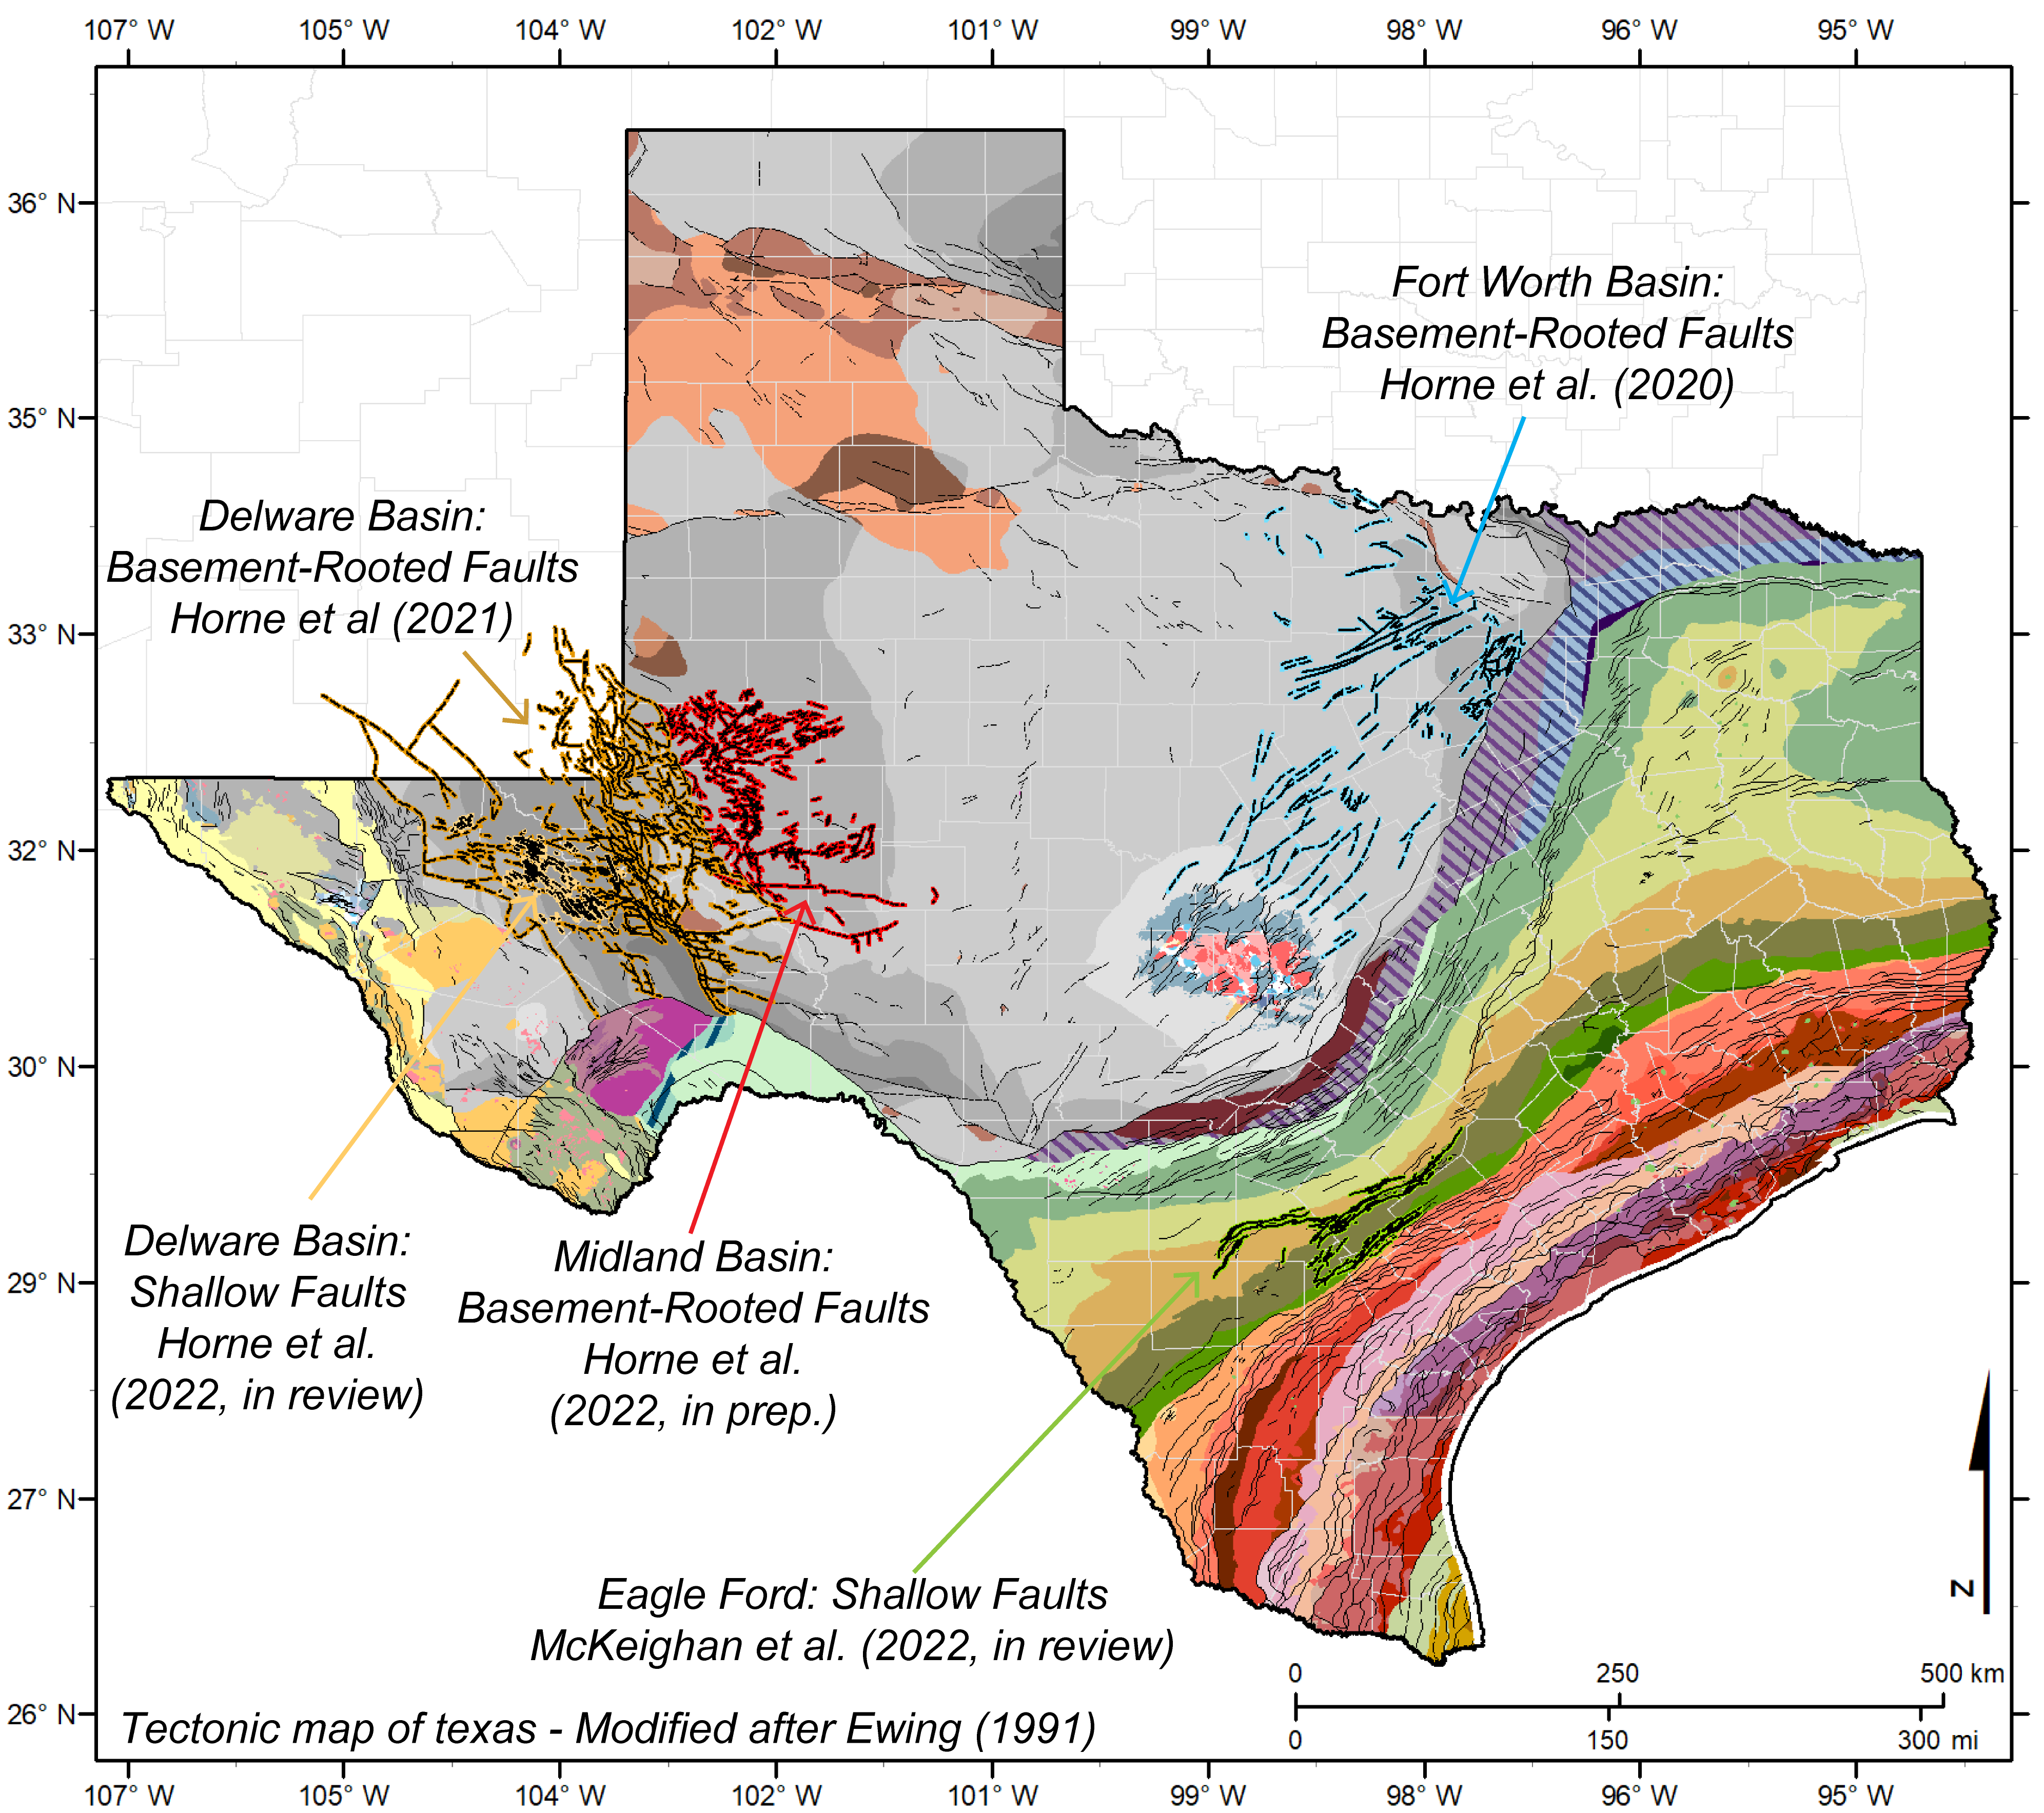 TexNet-CISR fault mapping